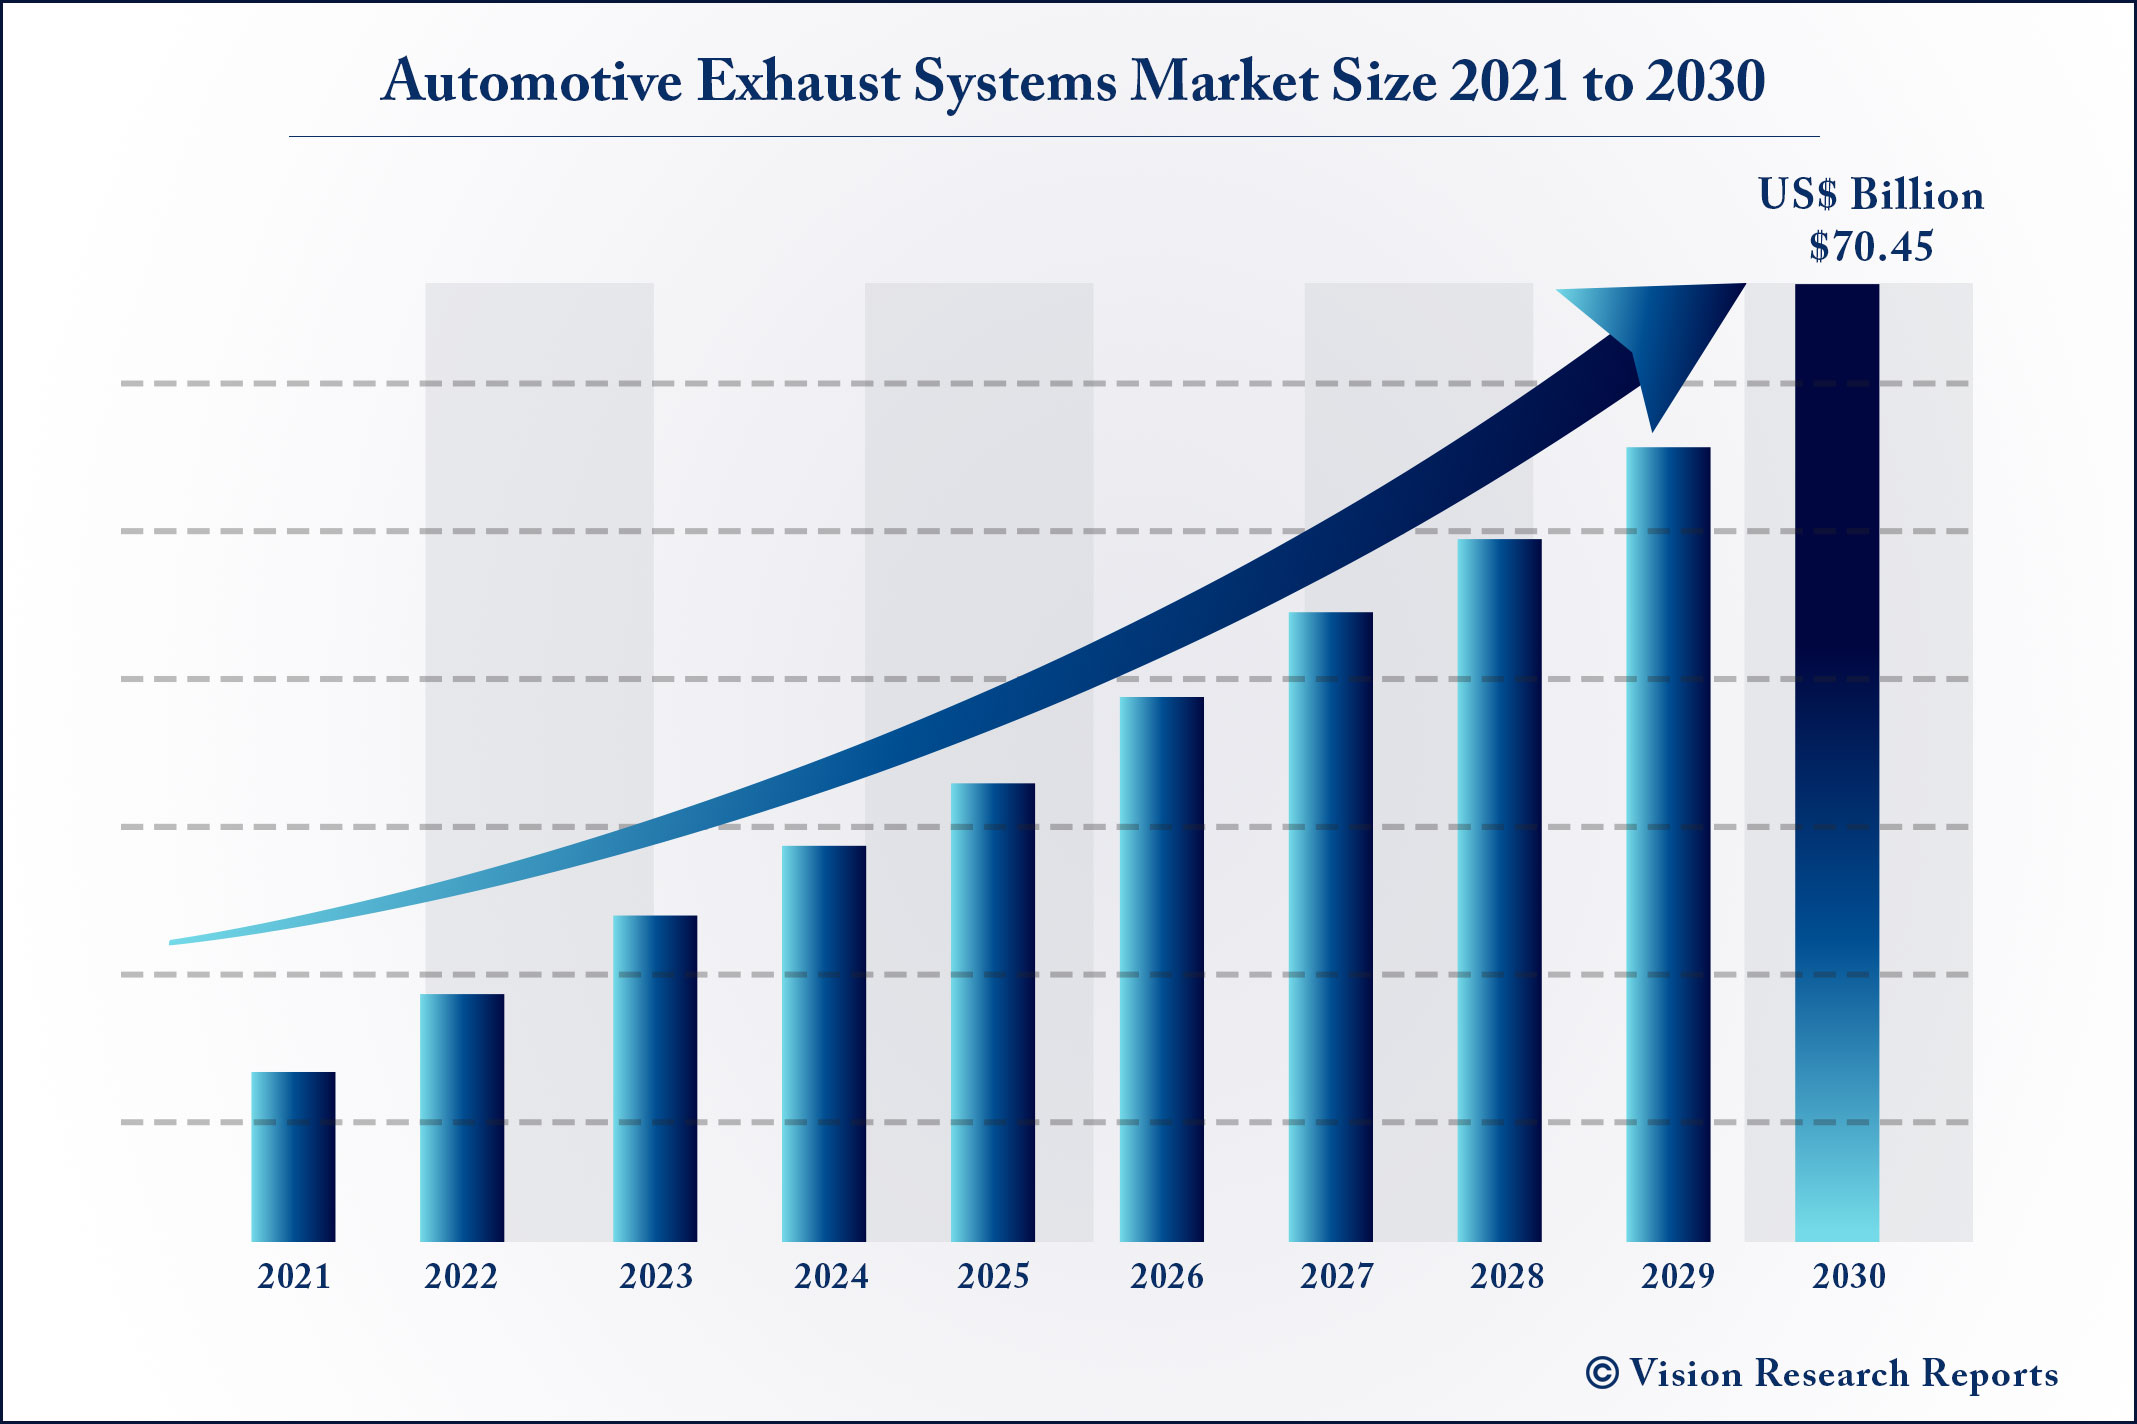 Automotive Exhaust Systems Market Size 2021 to 2030